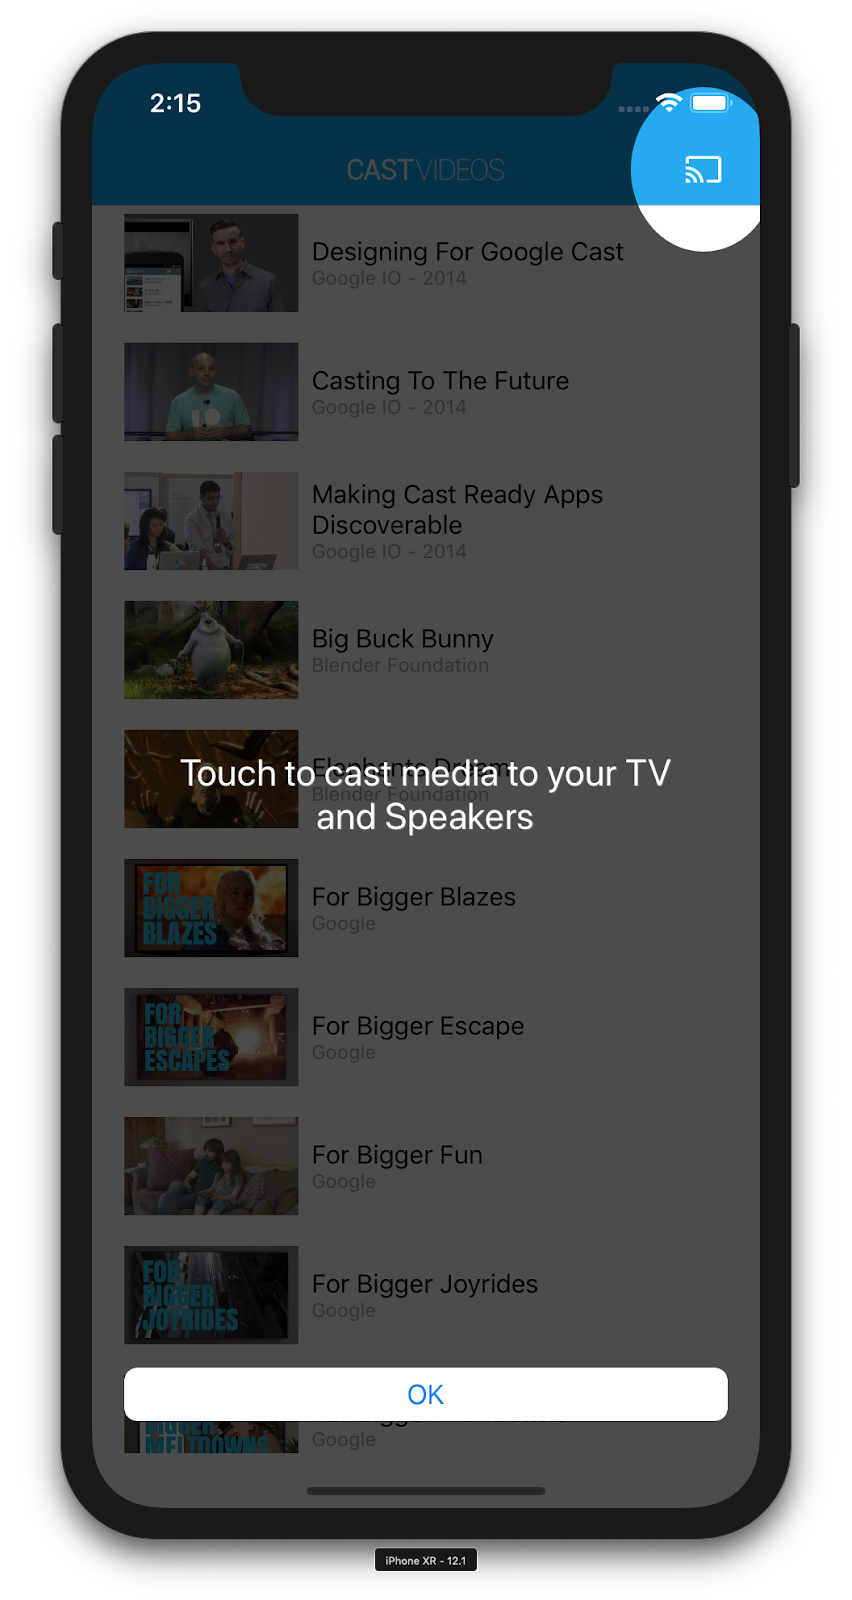 Illustration of an iPhone running the CastVideos app with the Cast button overlay, highlighting the Cast button and displaying the message 'Touch to cast media to your TV and Speakers'